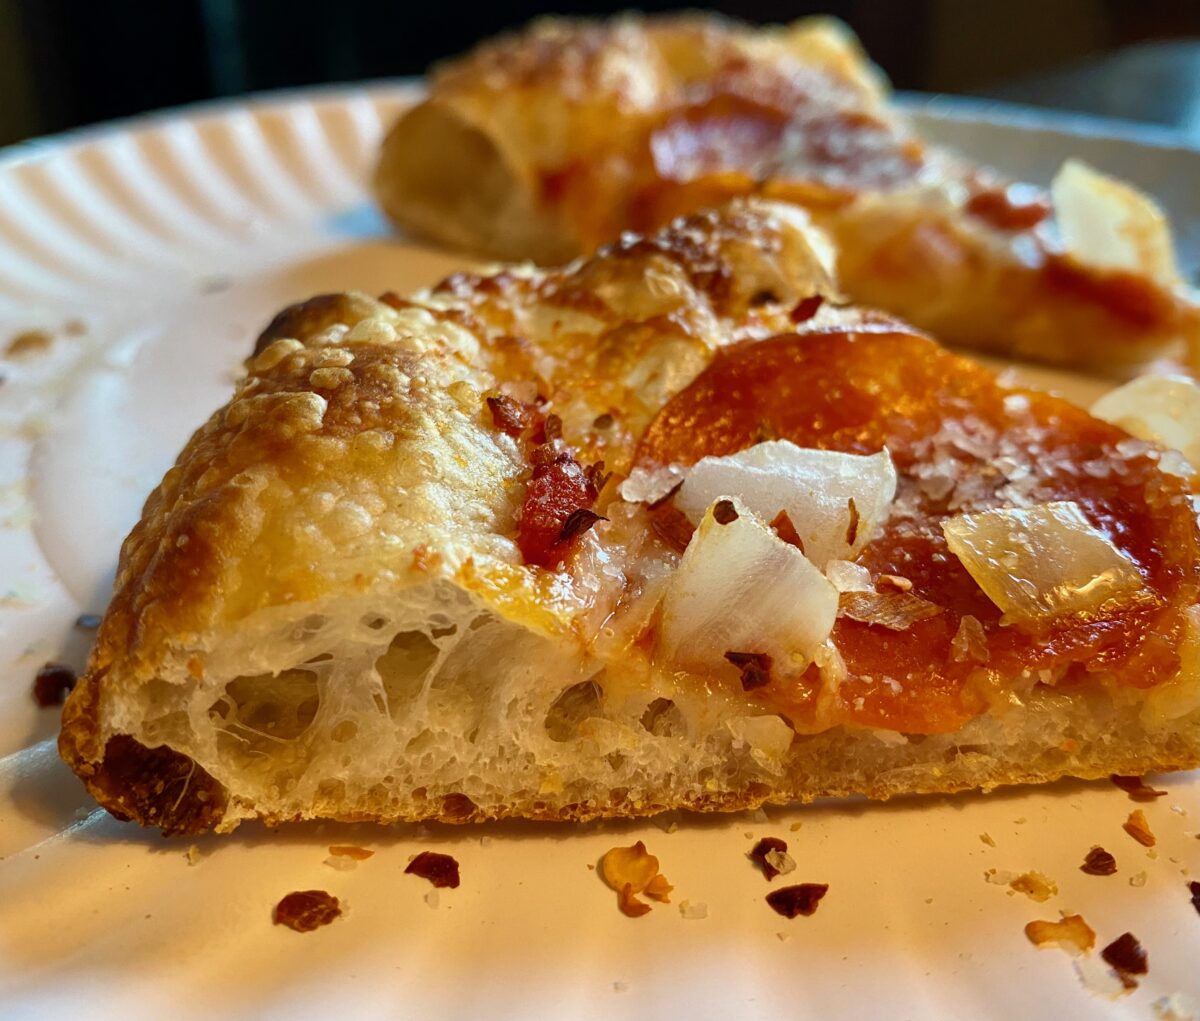 Close up side view of a slice of pizza. The crust is full of air pockets.